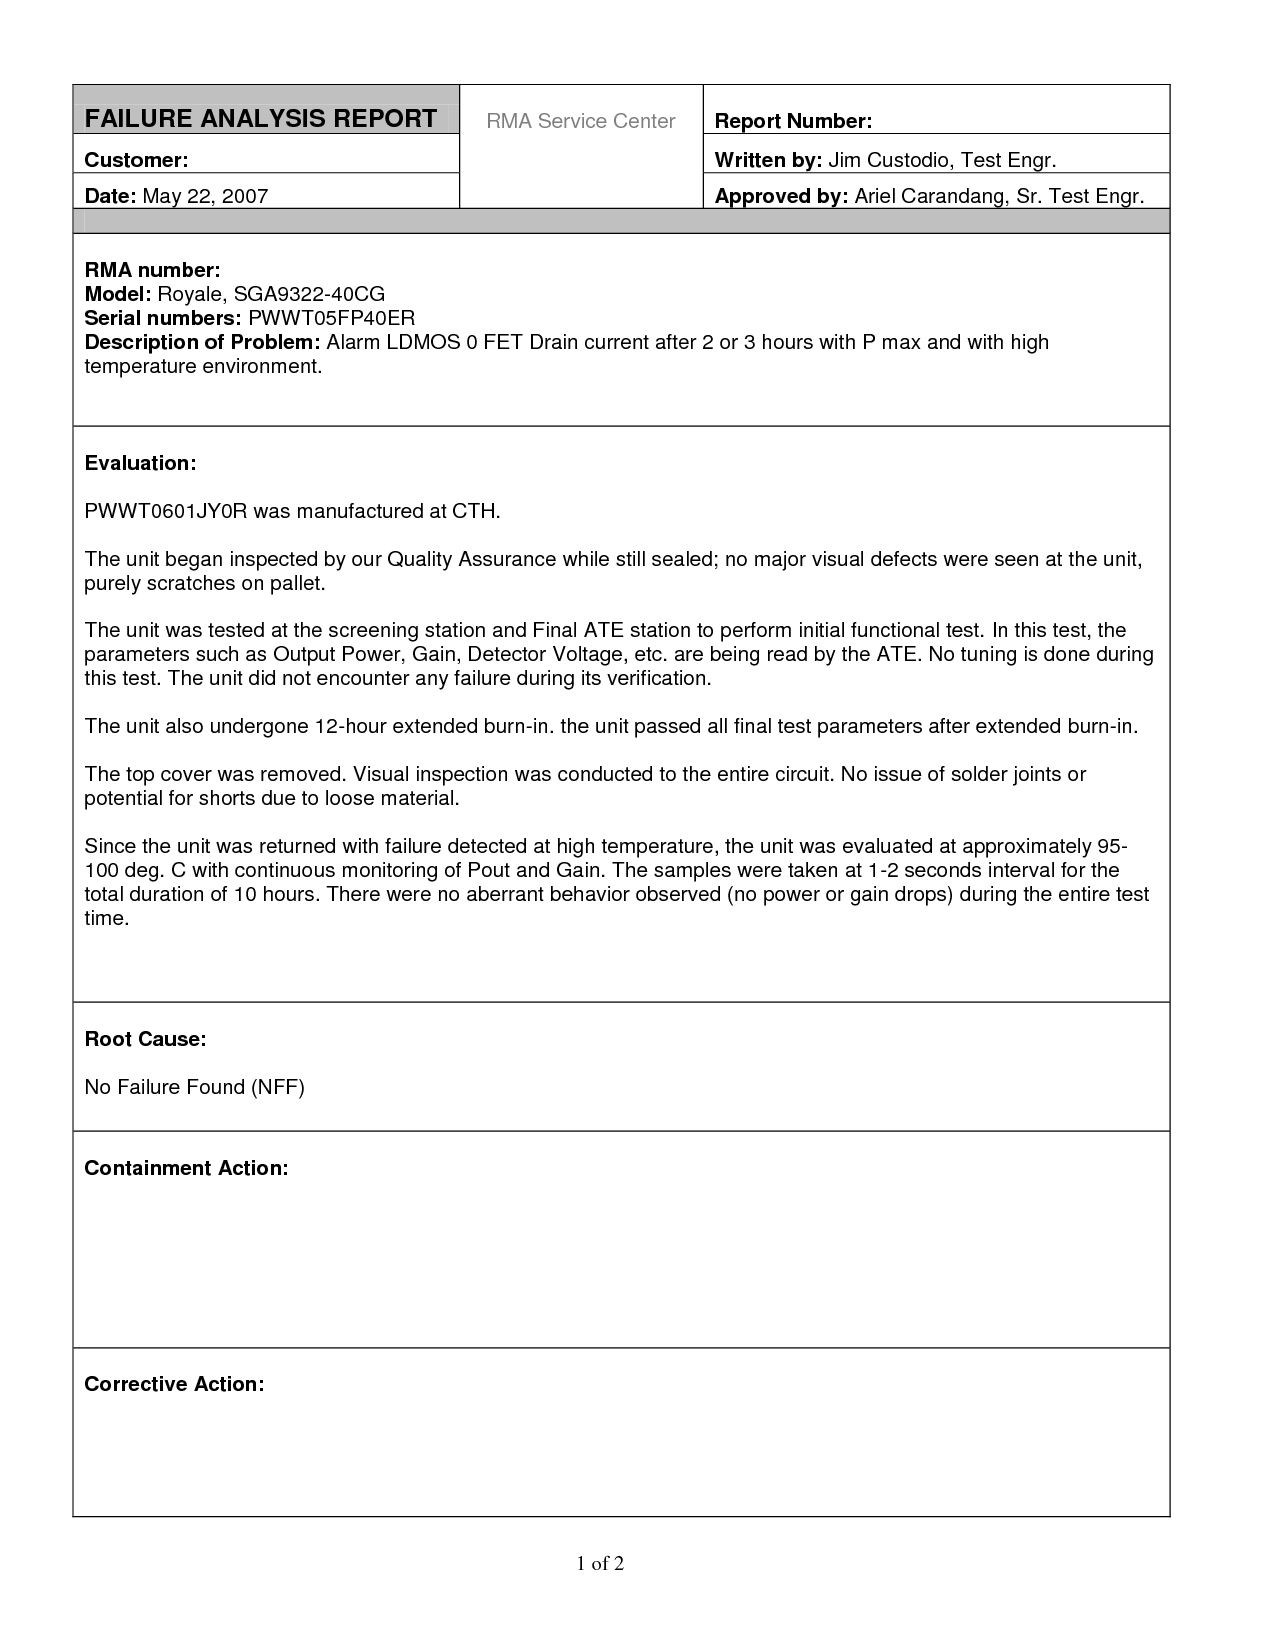 Excellent Failure Analysis Report Writtenjimcustodio34 In Failure Analysis Report Template